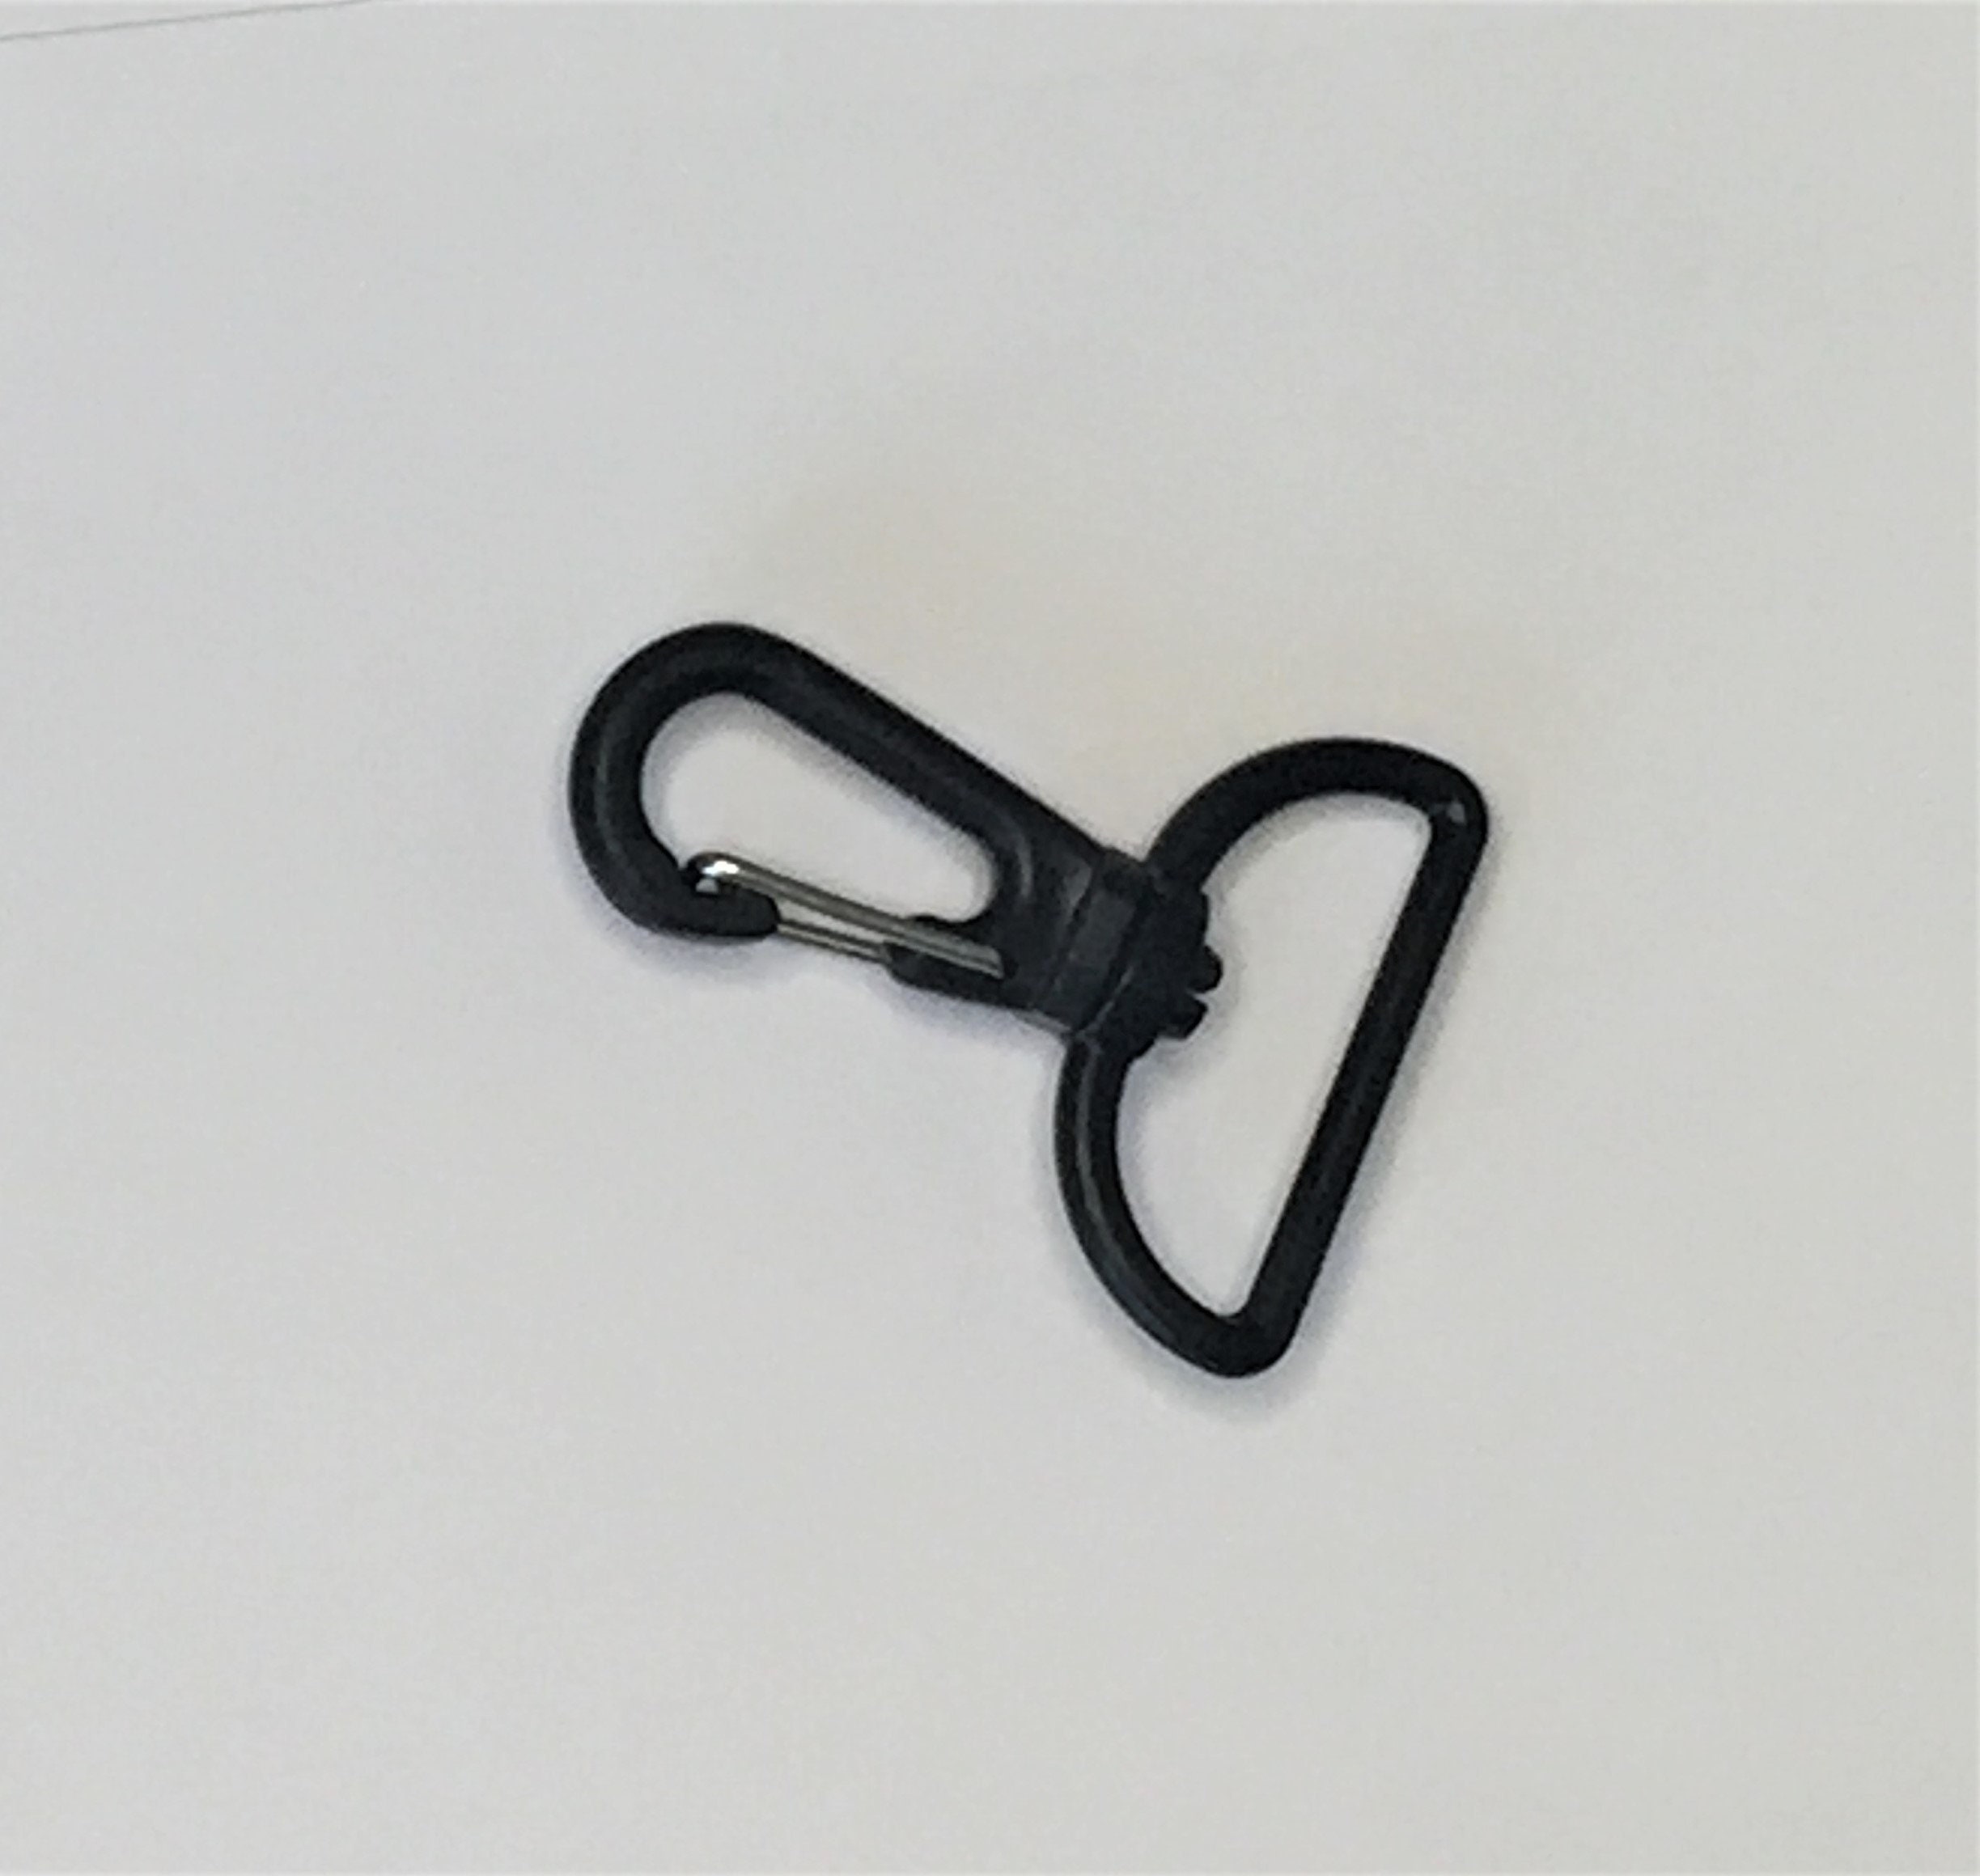 Buy 1 Inch Plastic Lobster Claw, Lot of 1 Swivel Snap Hooks , Bag or Belt  Rings for 1 Inch Webbing, Crafting Online in India 